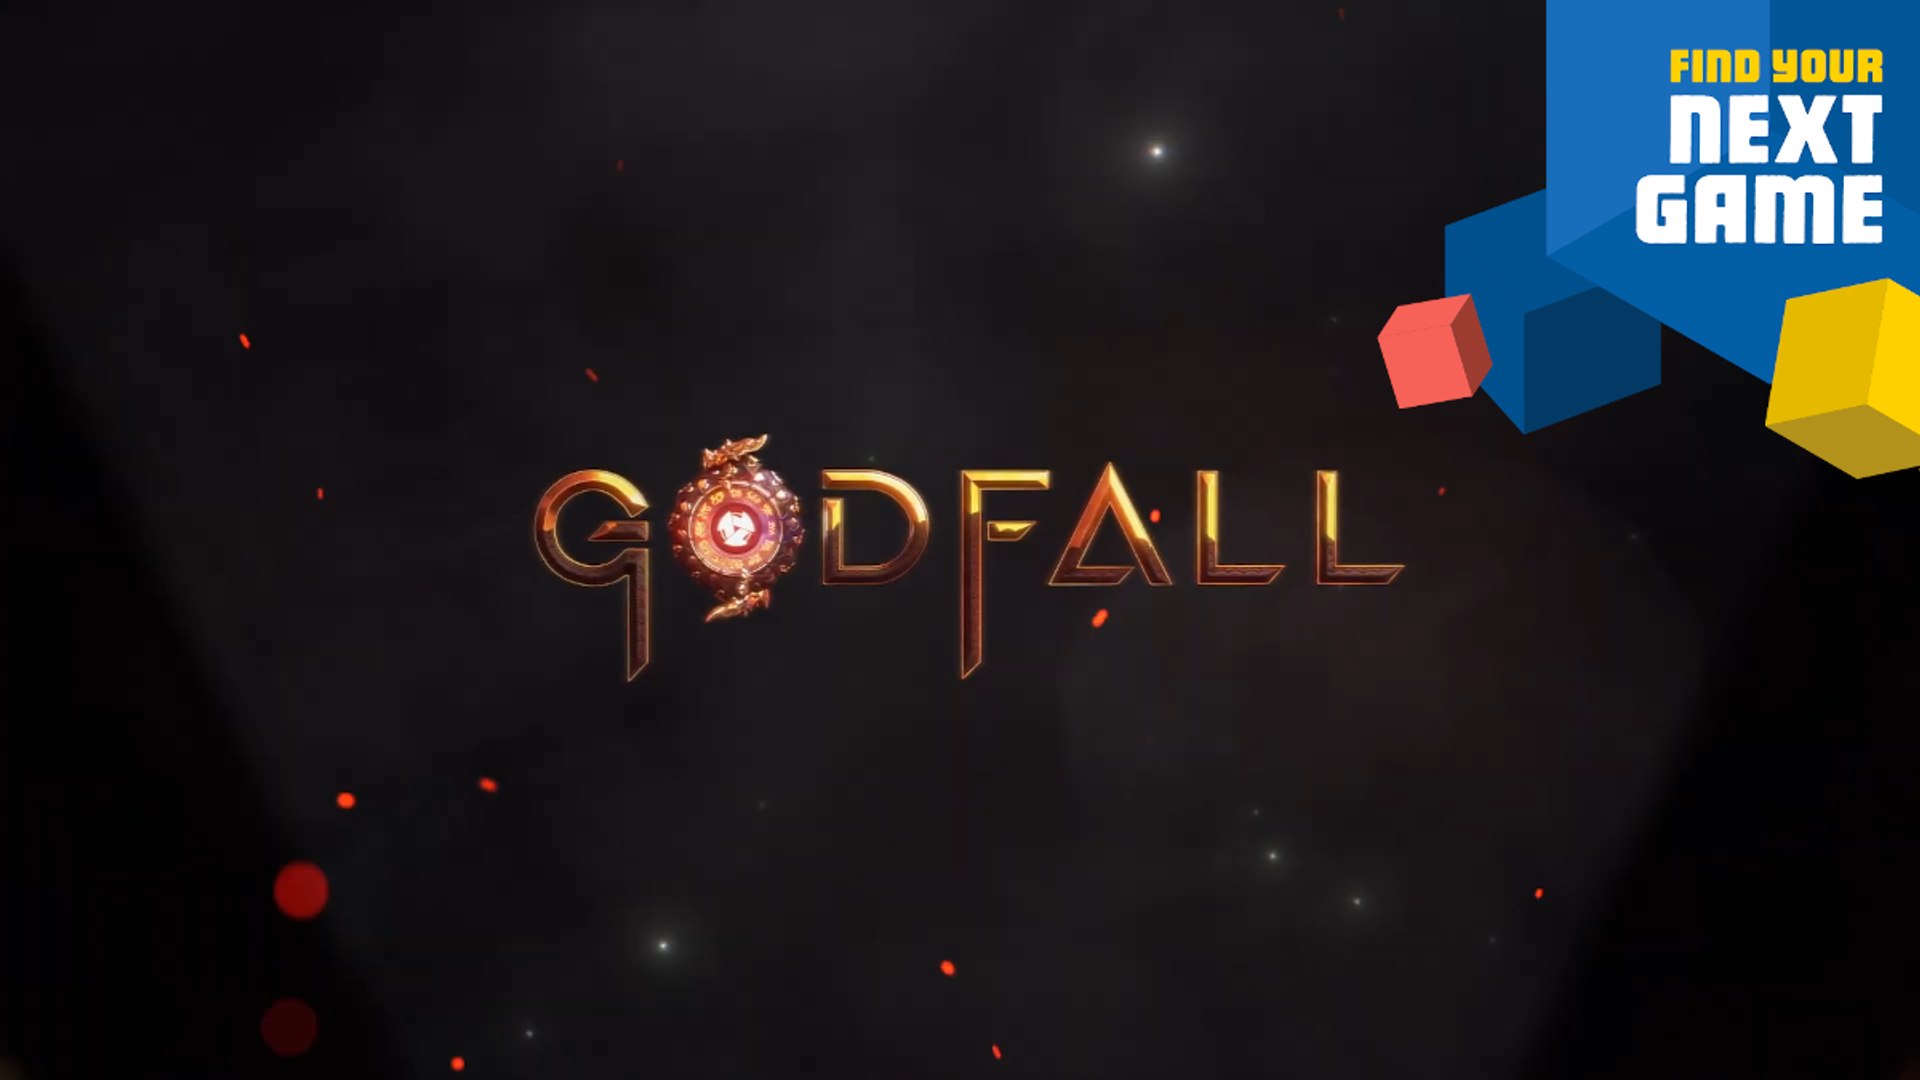 PS5: Godfall, trailer and gameplay presentation